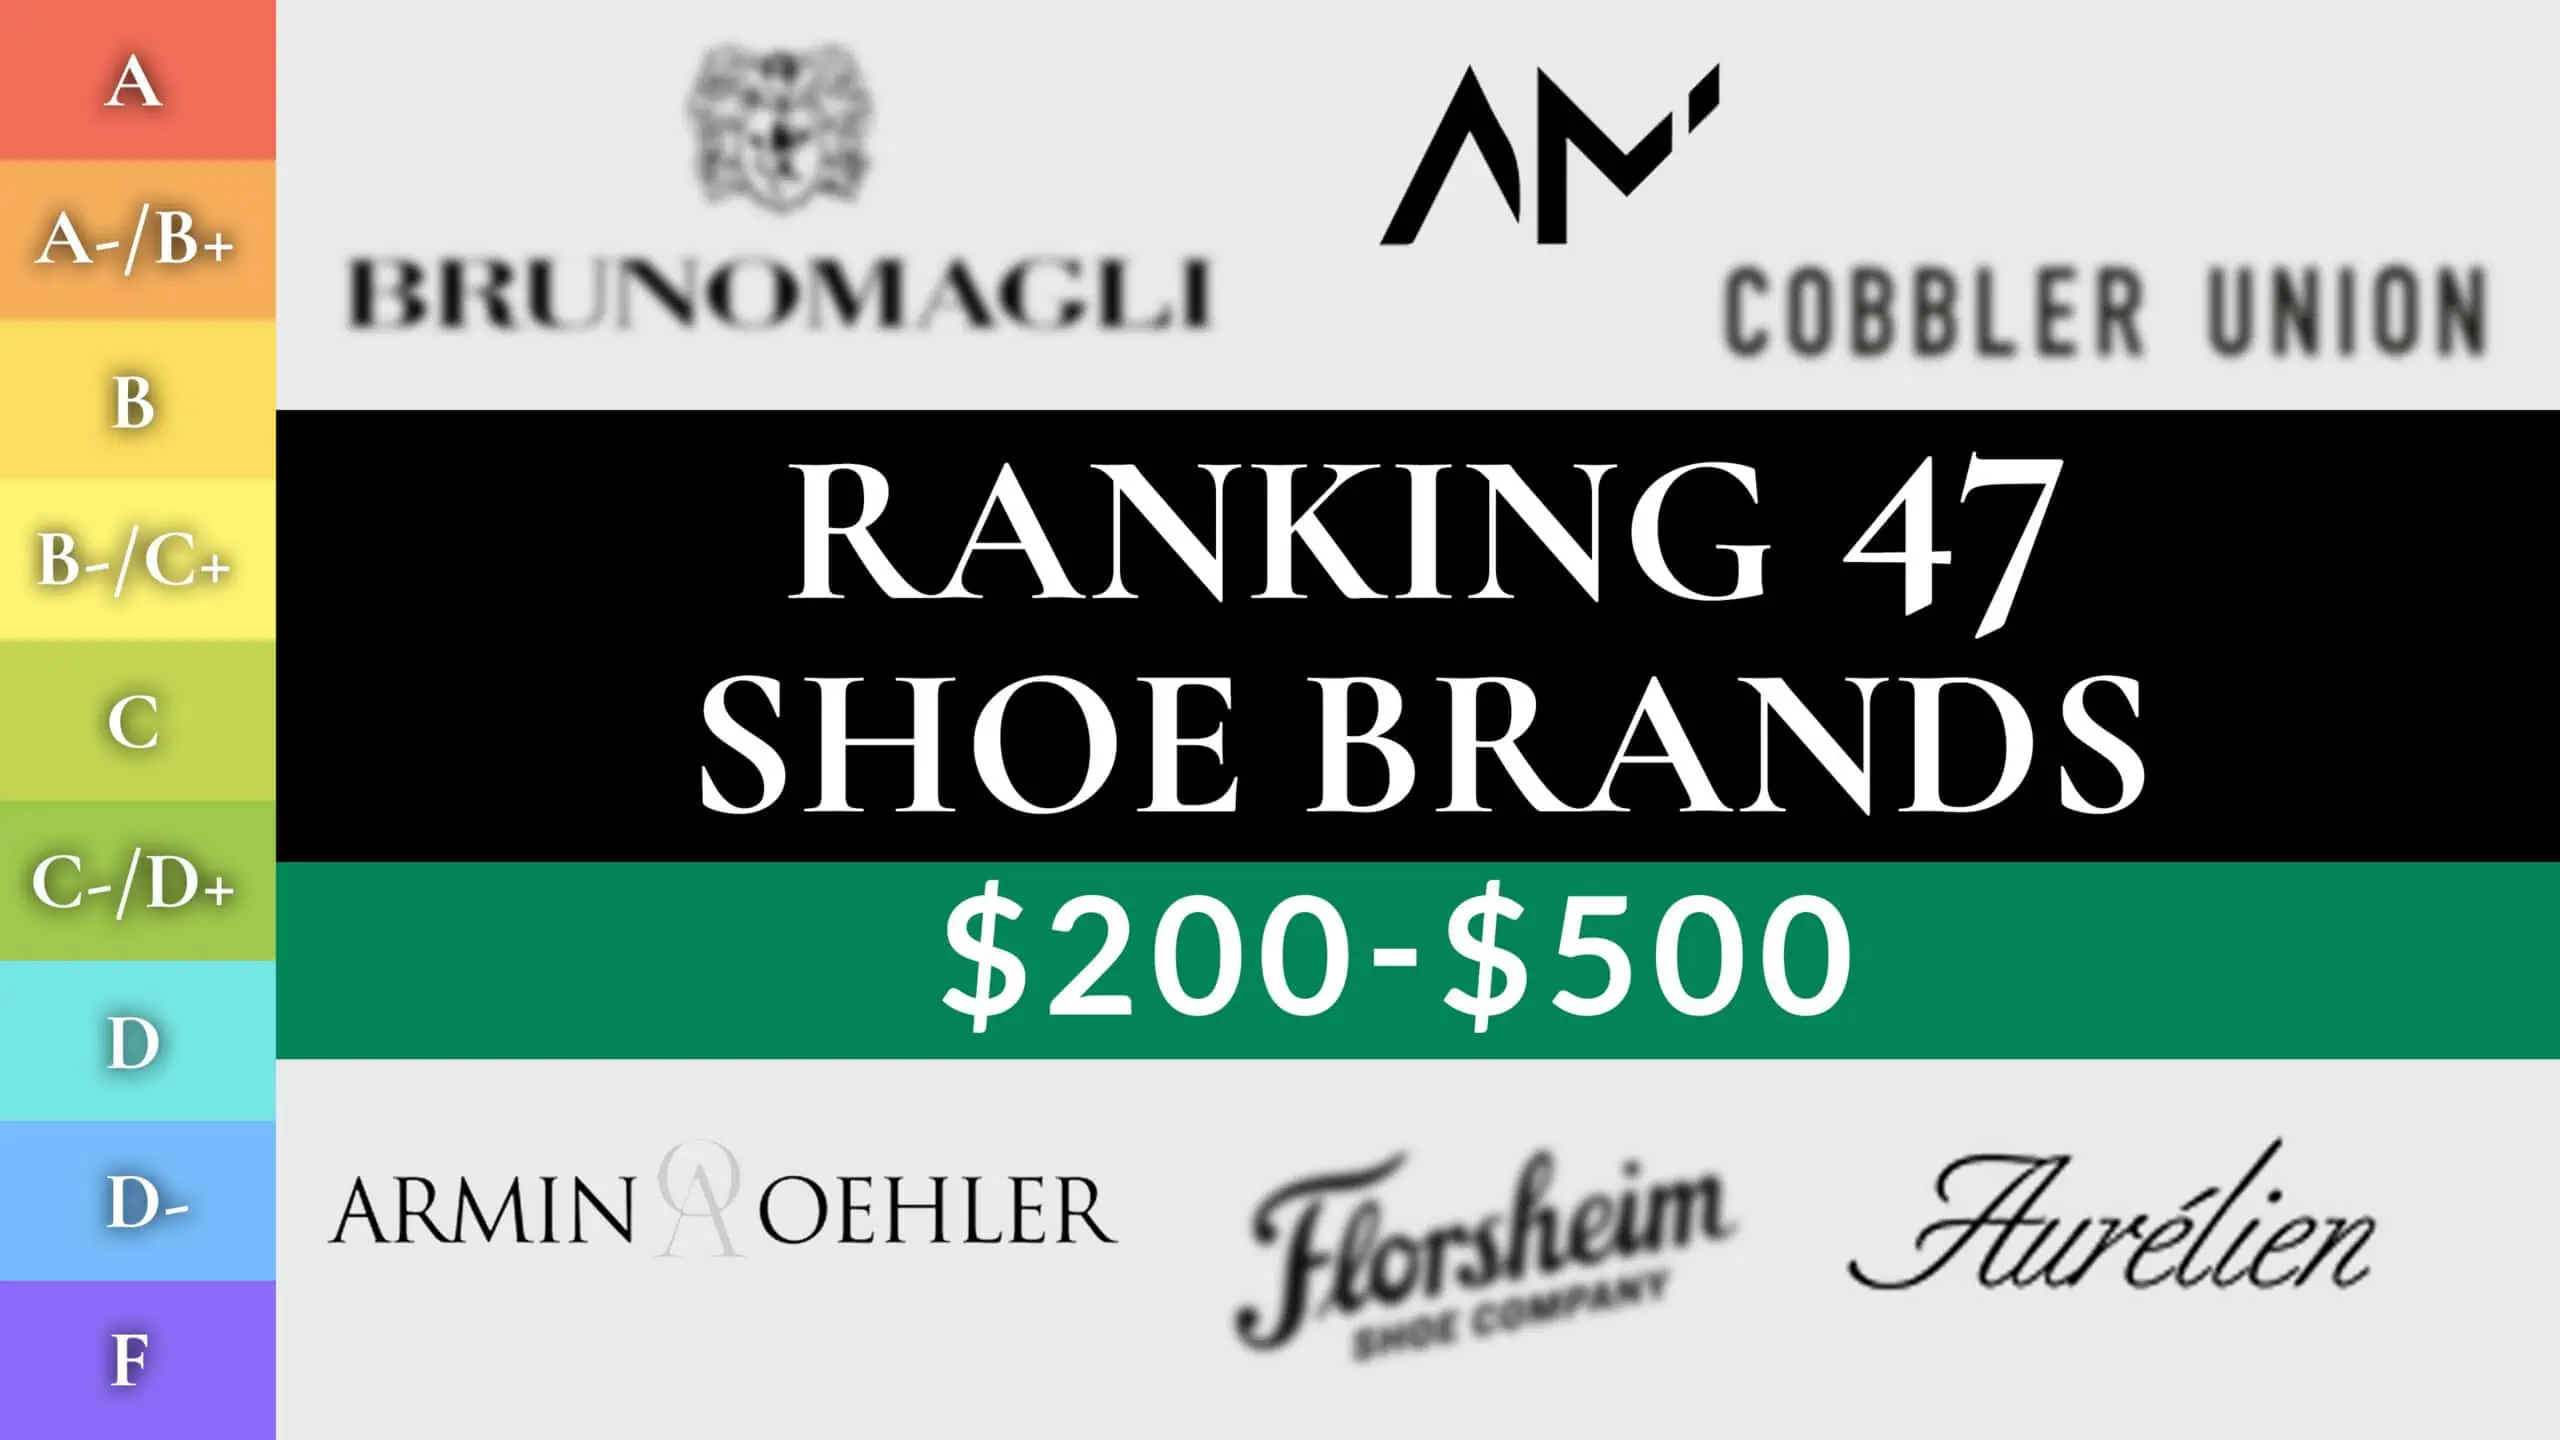 Best Exotic Leather Shoe Brands: Top 10 Shoemakers & All Types Of Exotic  Leathers Reviewed 